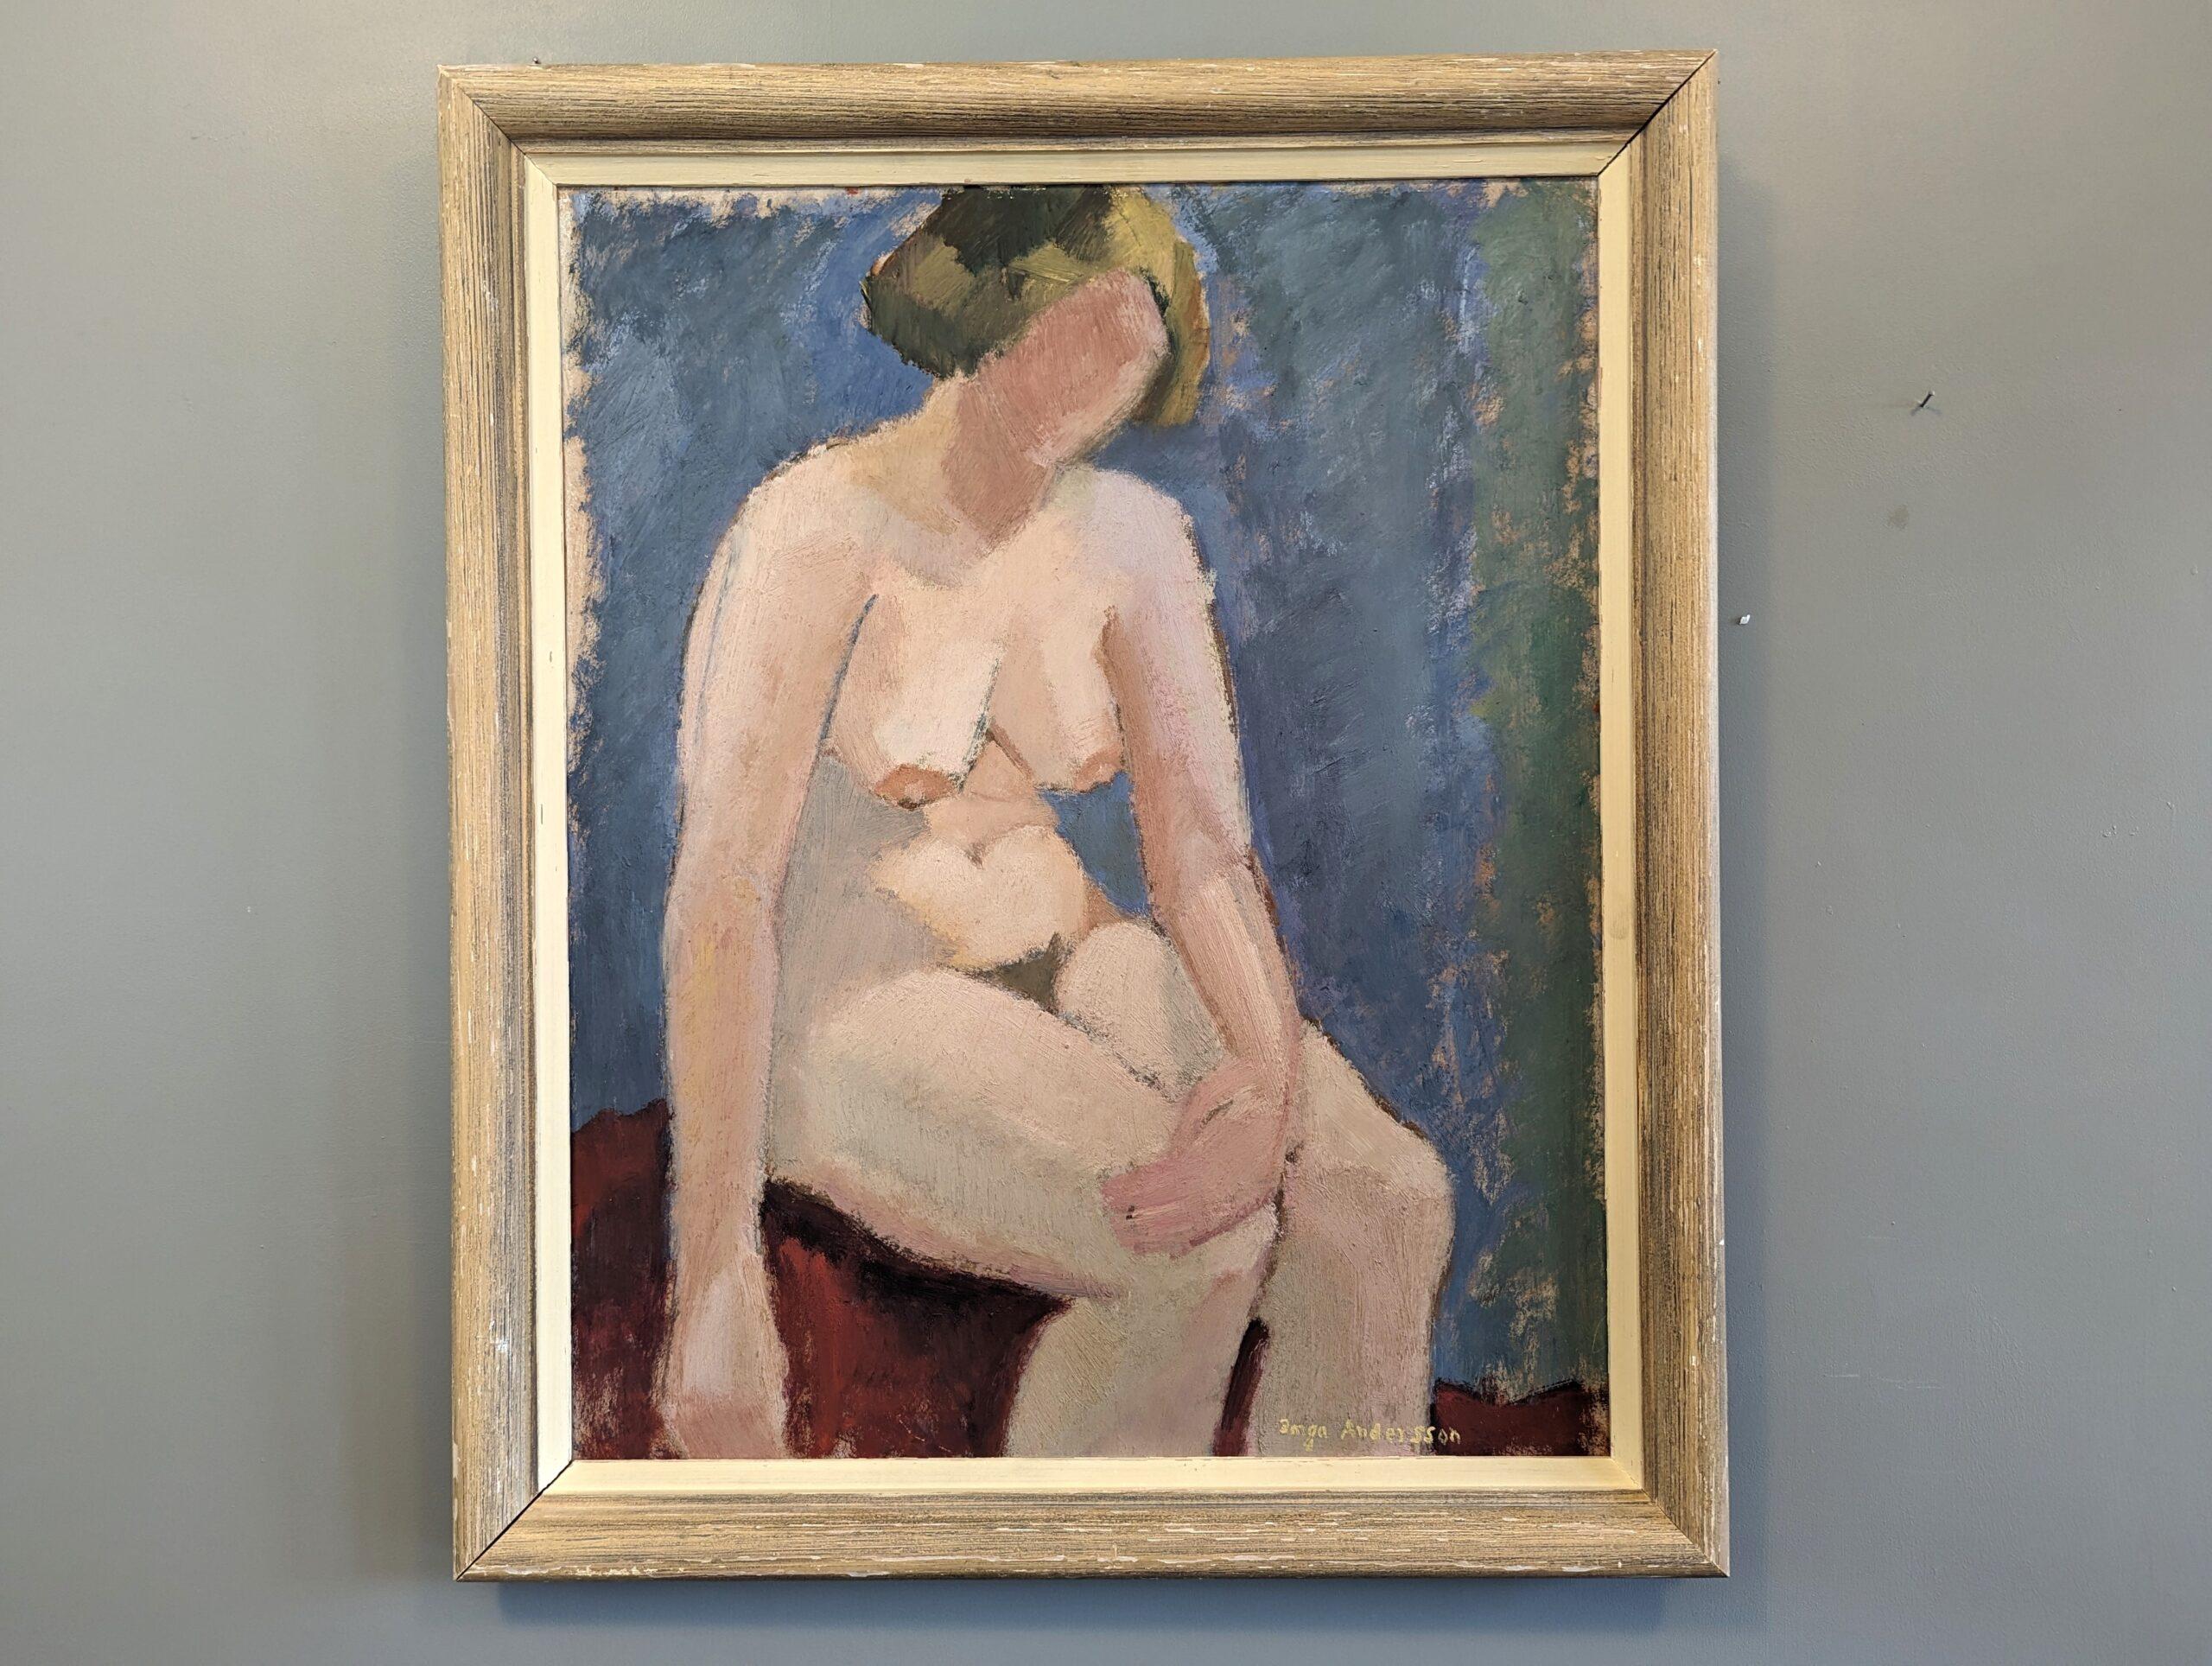 ANGELA
Size: 69 x 58 cm (including frame)
Oil on Board

A brilliantly executed mid-century modernist style figurative nude composition, painted in oil onto board.

The focal point of this painting is a nude female figure, delicately seated upon a